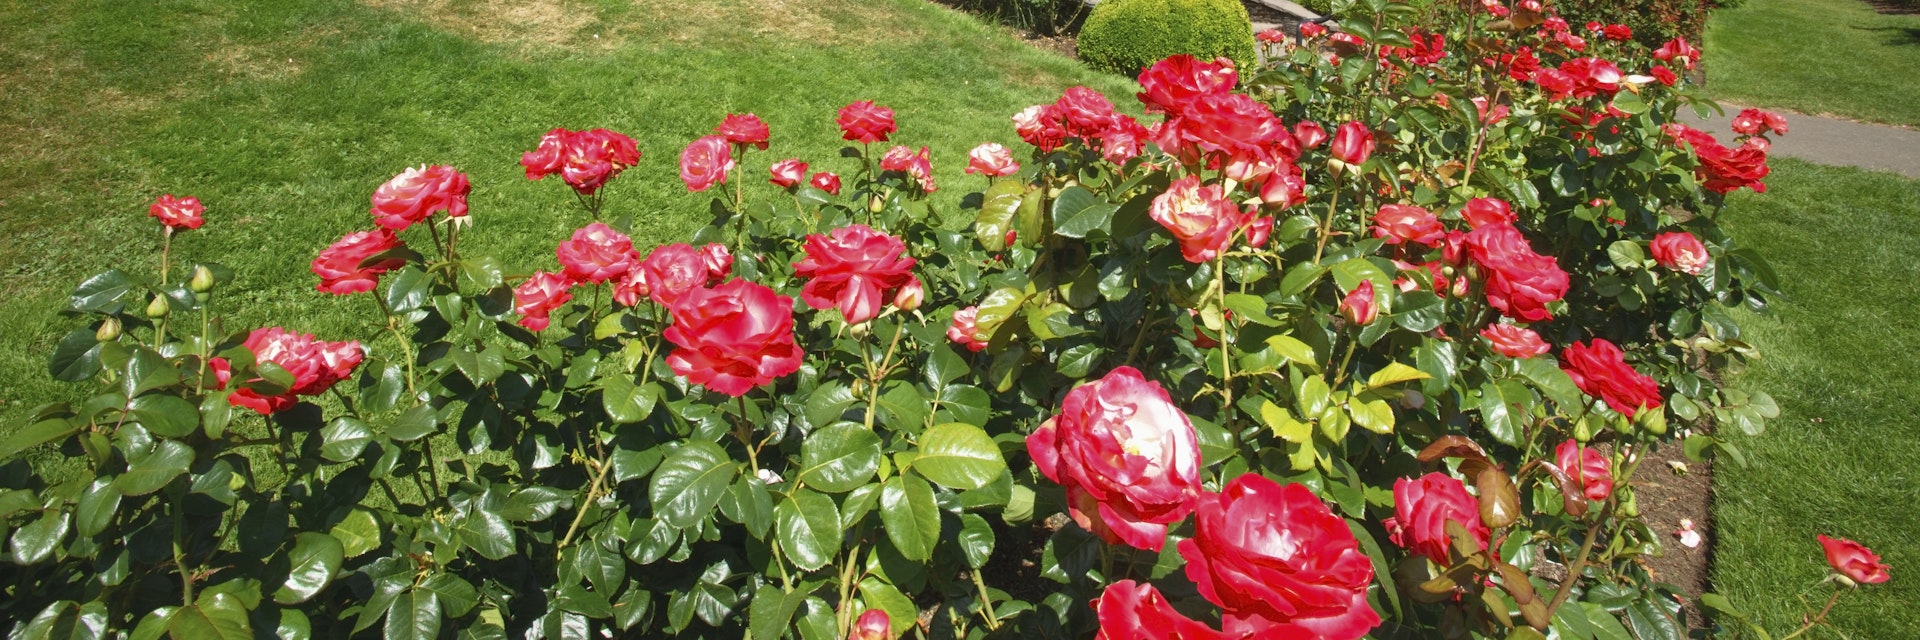 Red Roses In A Garden At The International Rose Test Garden